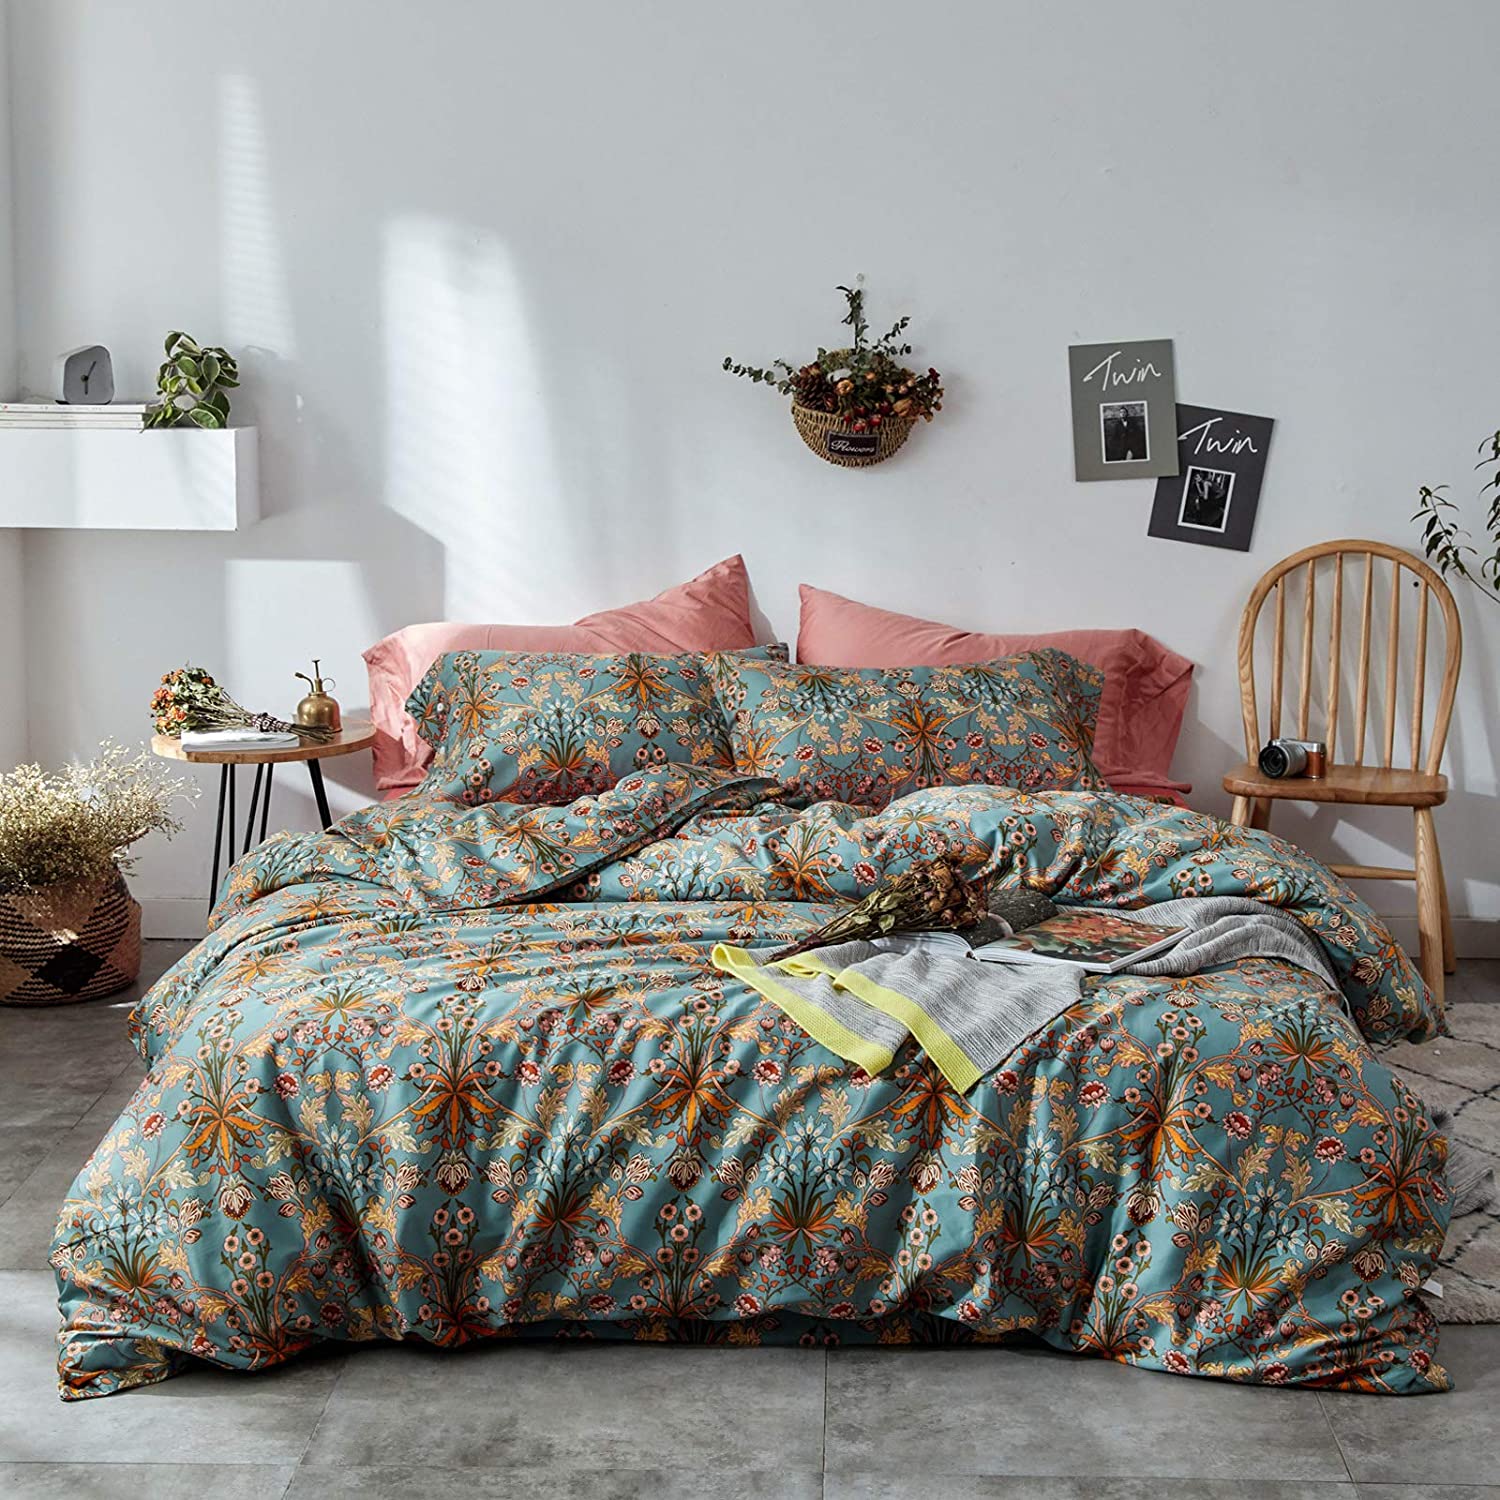 Price:$78.99 mixinni Vintage Style Garden Flower Duvet Cover Set with Zipper Closure Soft Cotton Yellow Flower Pattern on Blue Bedding Quilt Cover Set(King,Autumn) : Everything Else